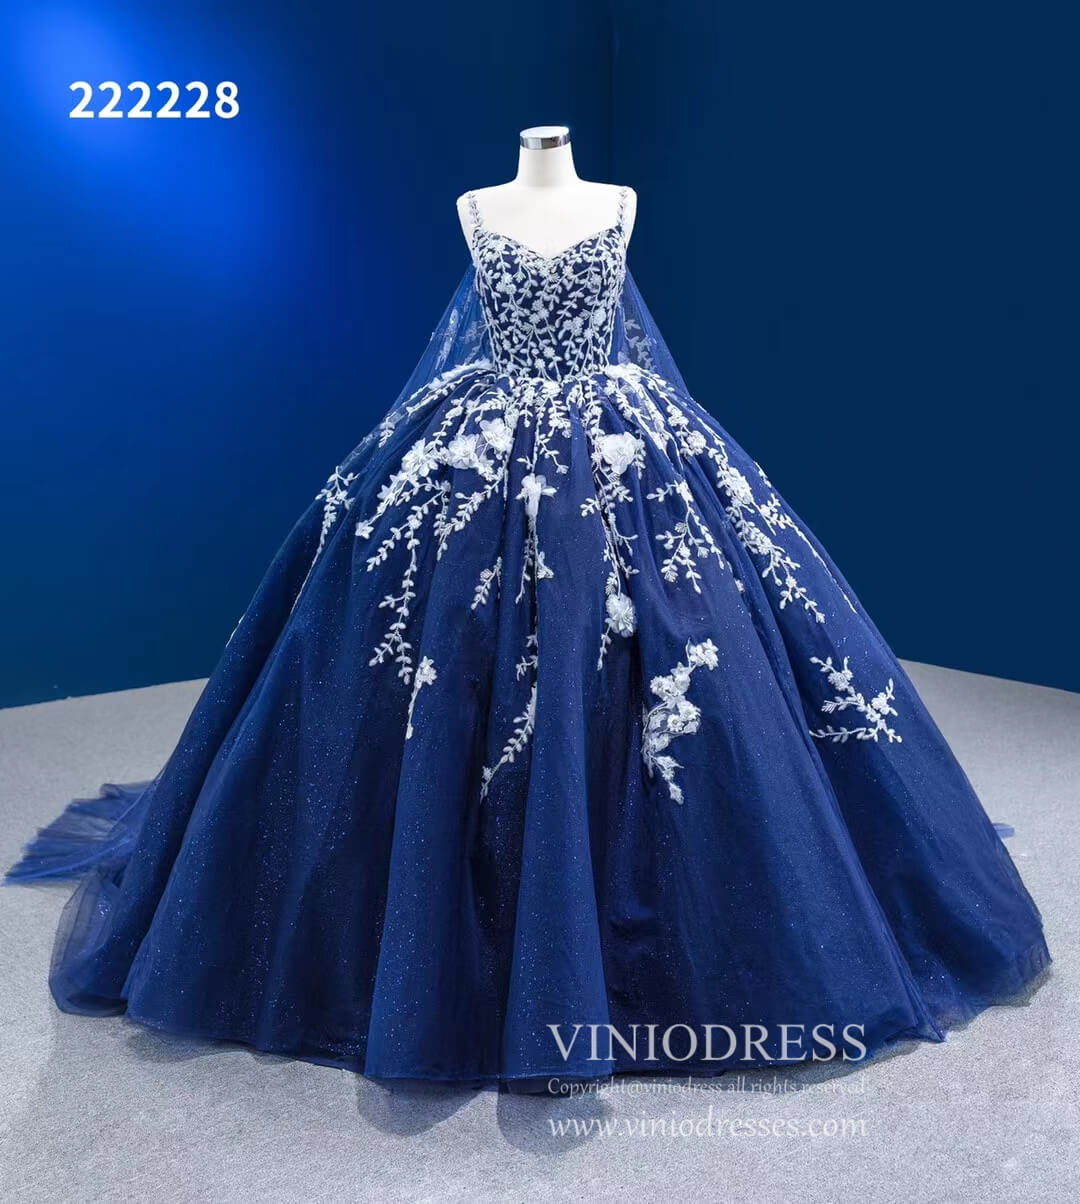 Discover 121+ beautiful ball gowns images